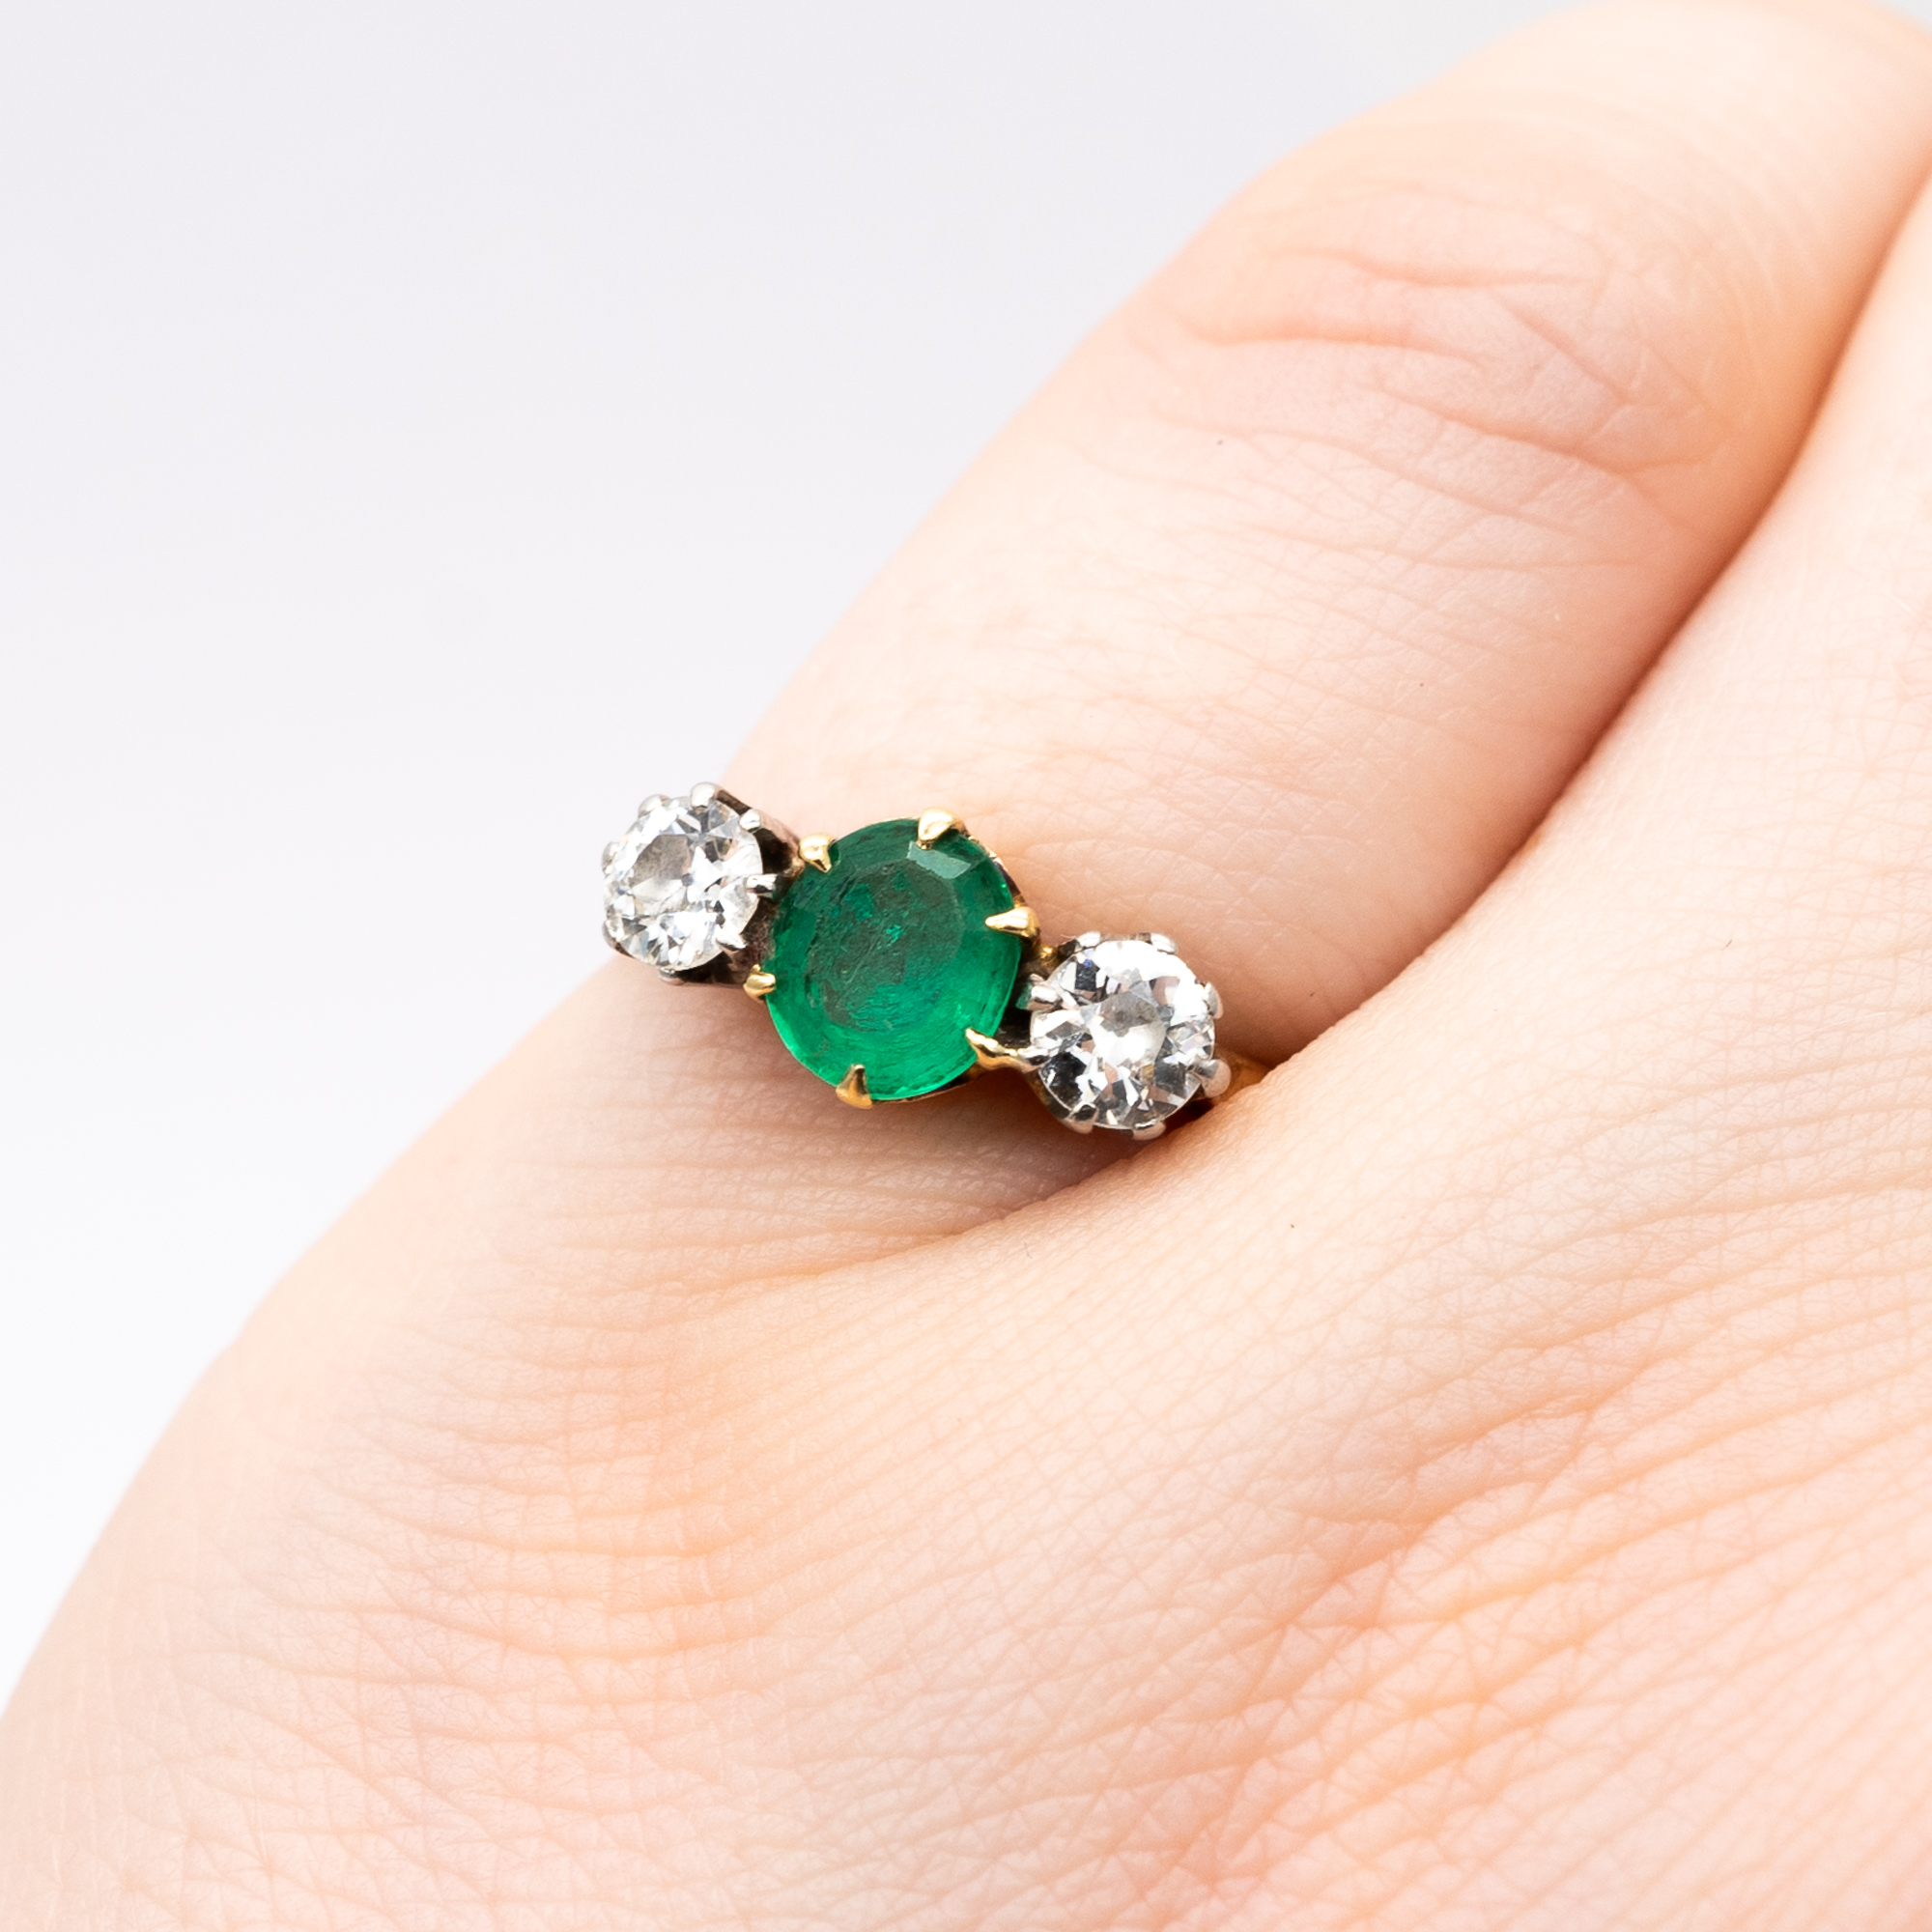 An 18ct yellow gold emerald and diamond ring - Image 6 of 6